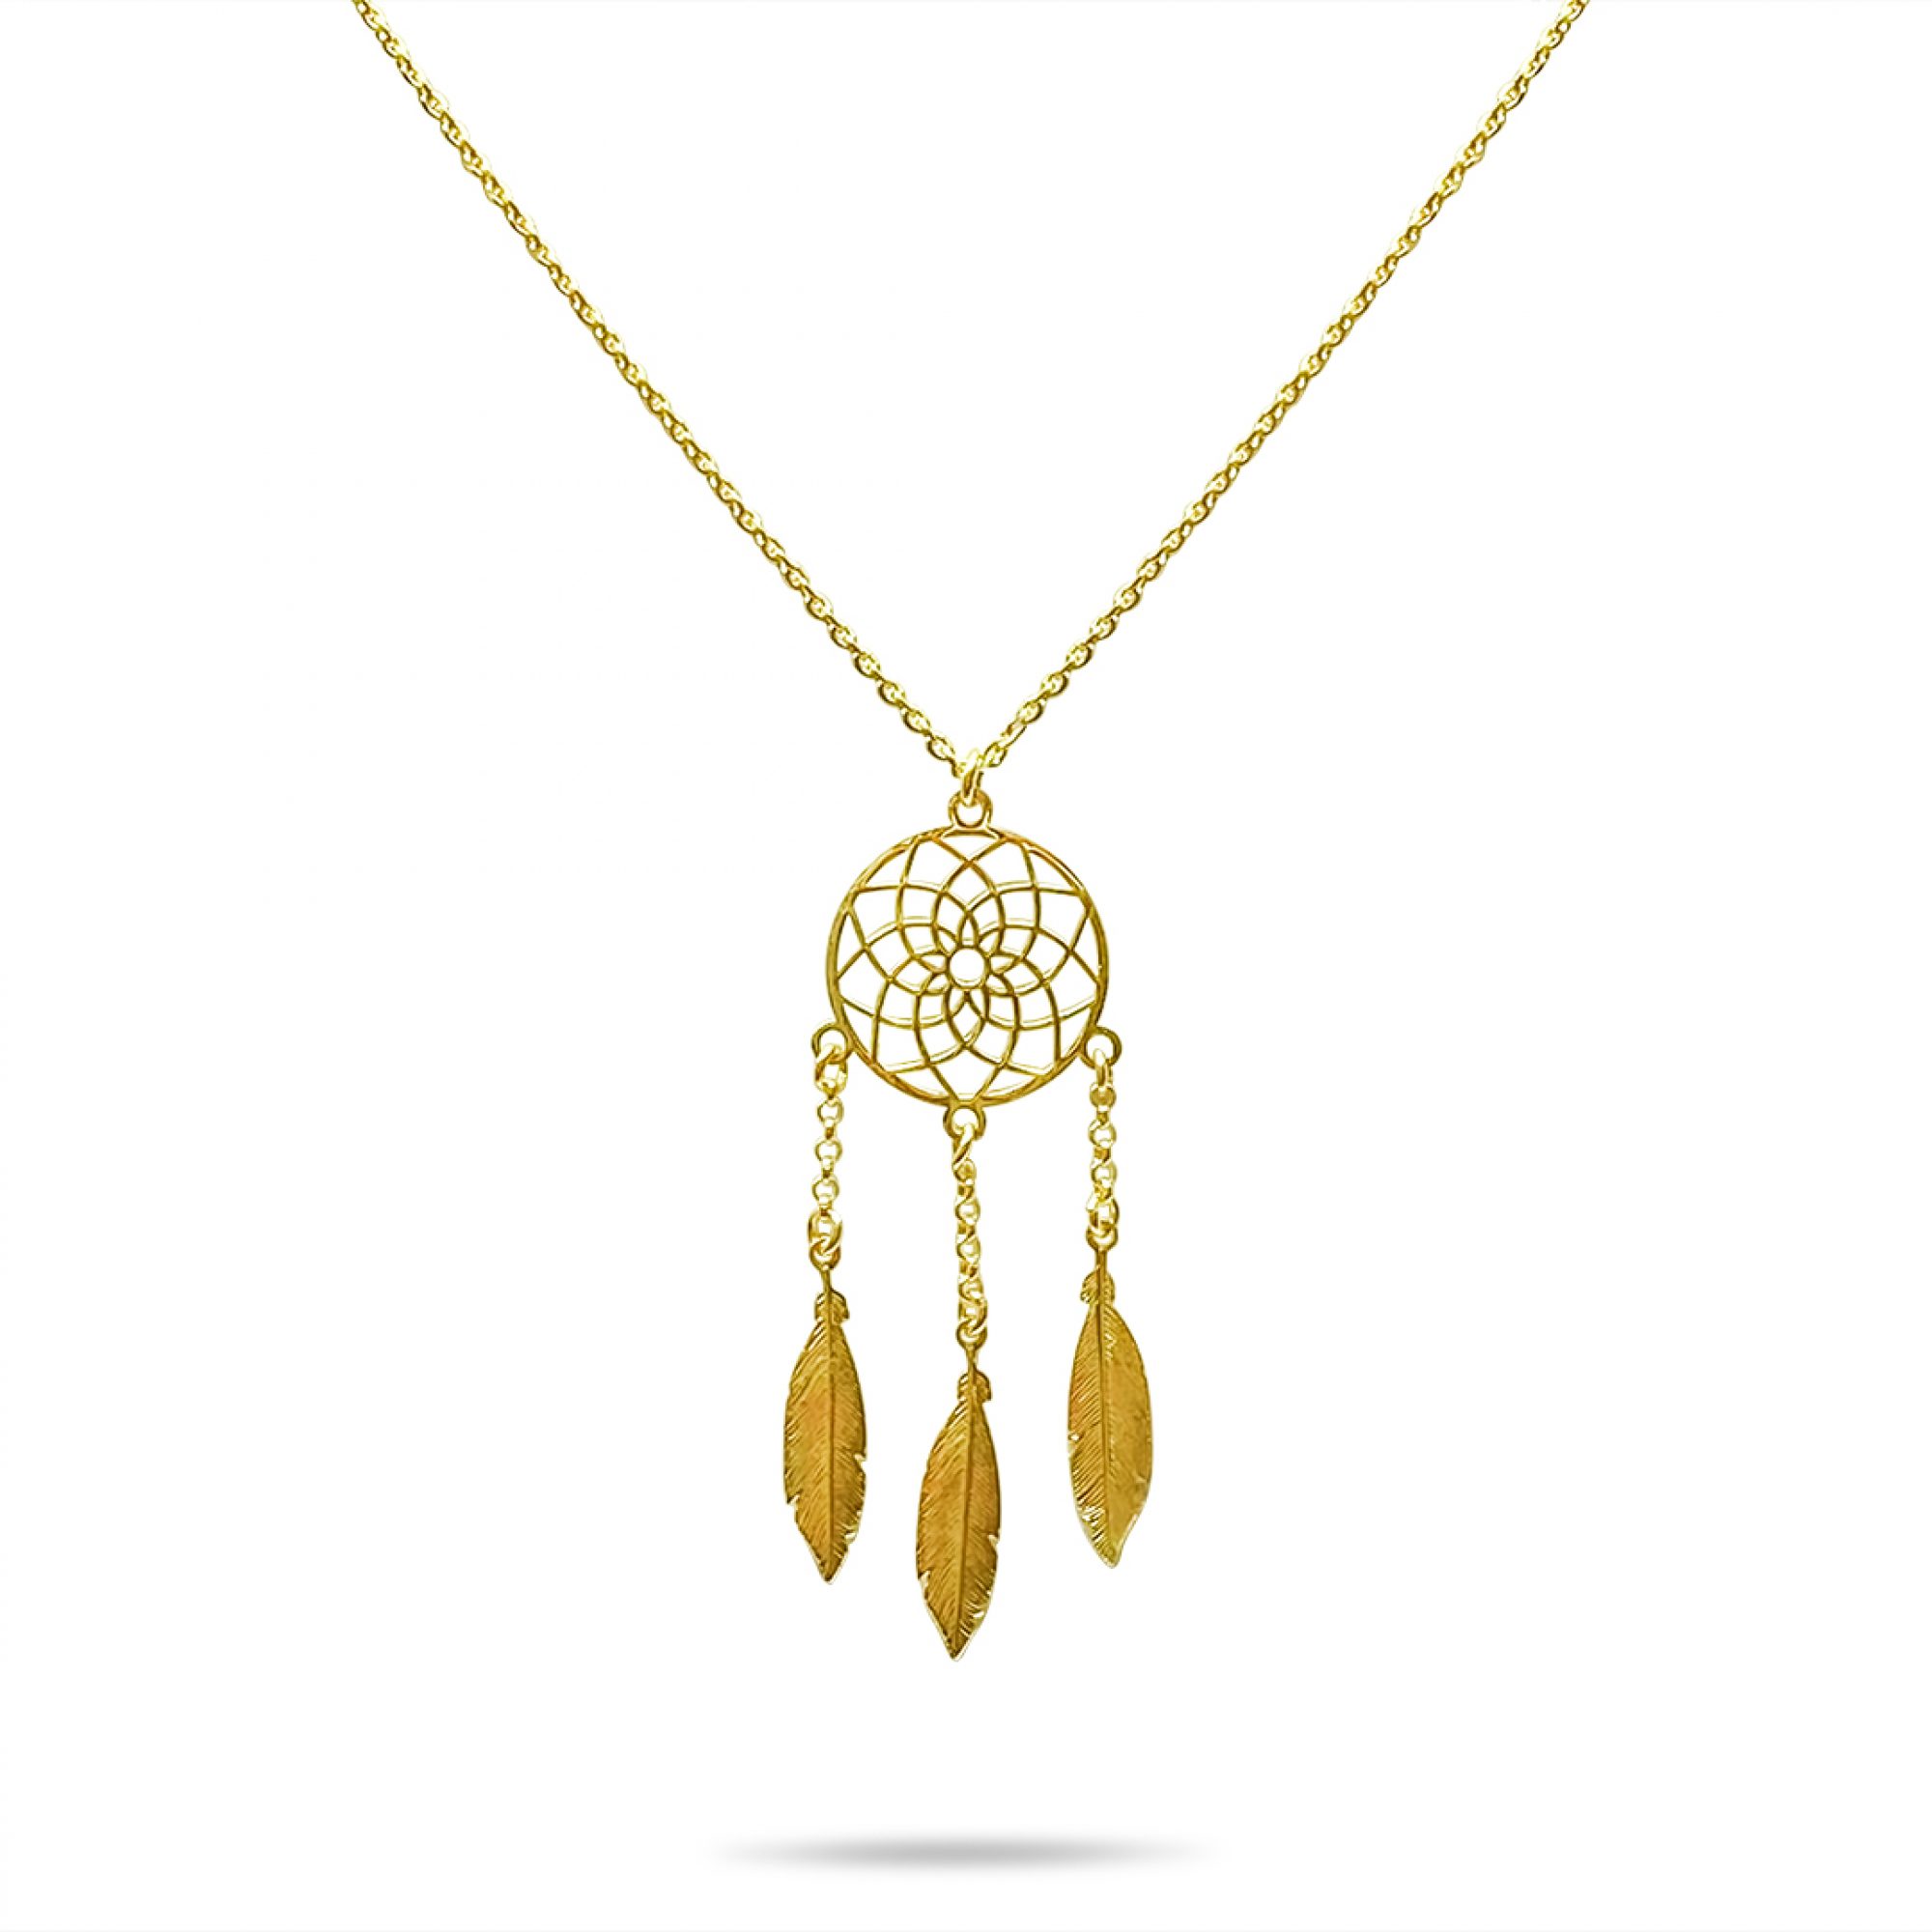 Dream catcher gold plated necklace 